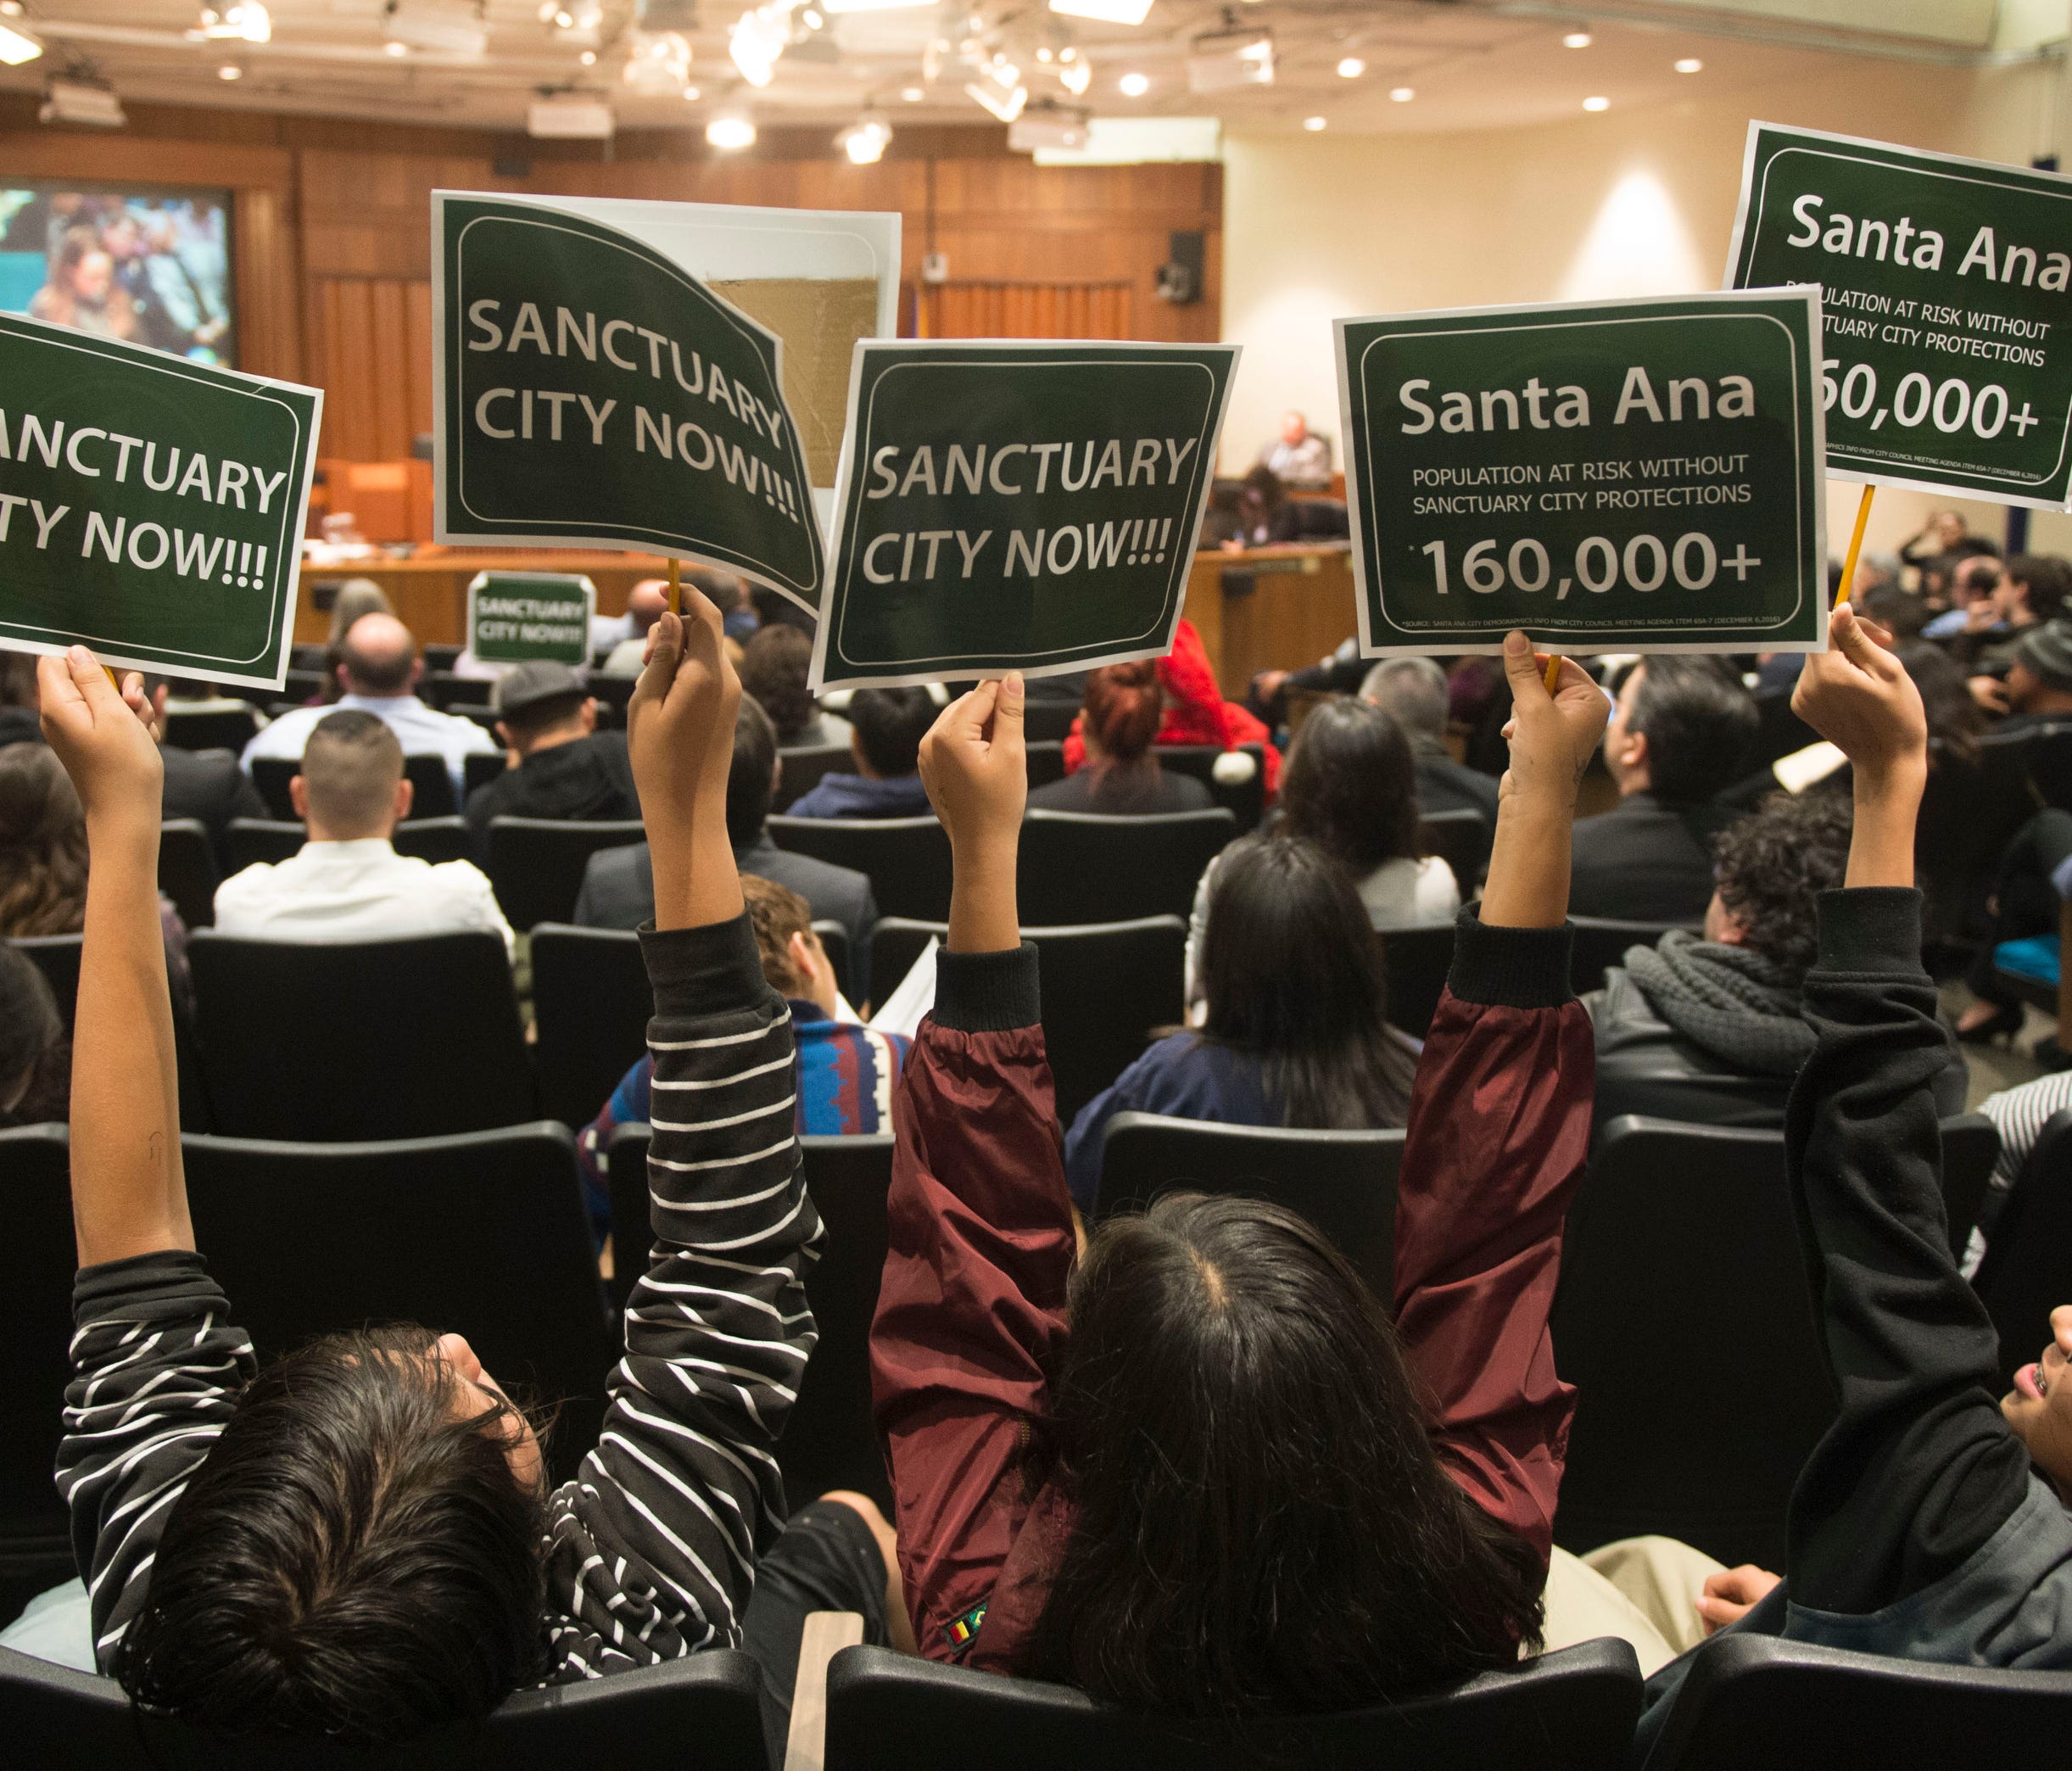 Students show their support for a proposed ordinance declaring Santa Ana, Calif, a sanctuary for all residents regardless of immigration status during a city council meeting Dec. 20, 2016.